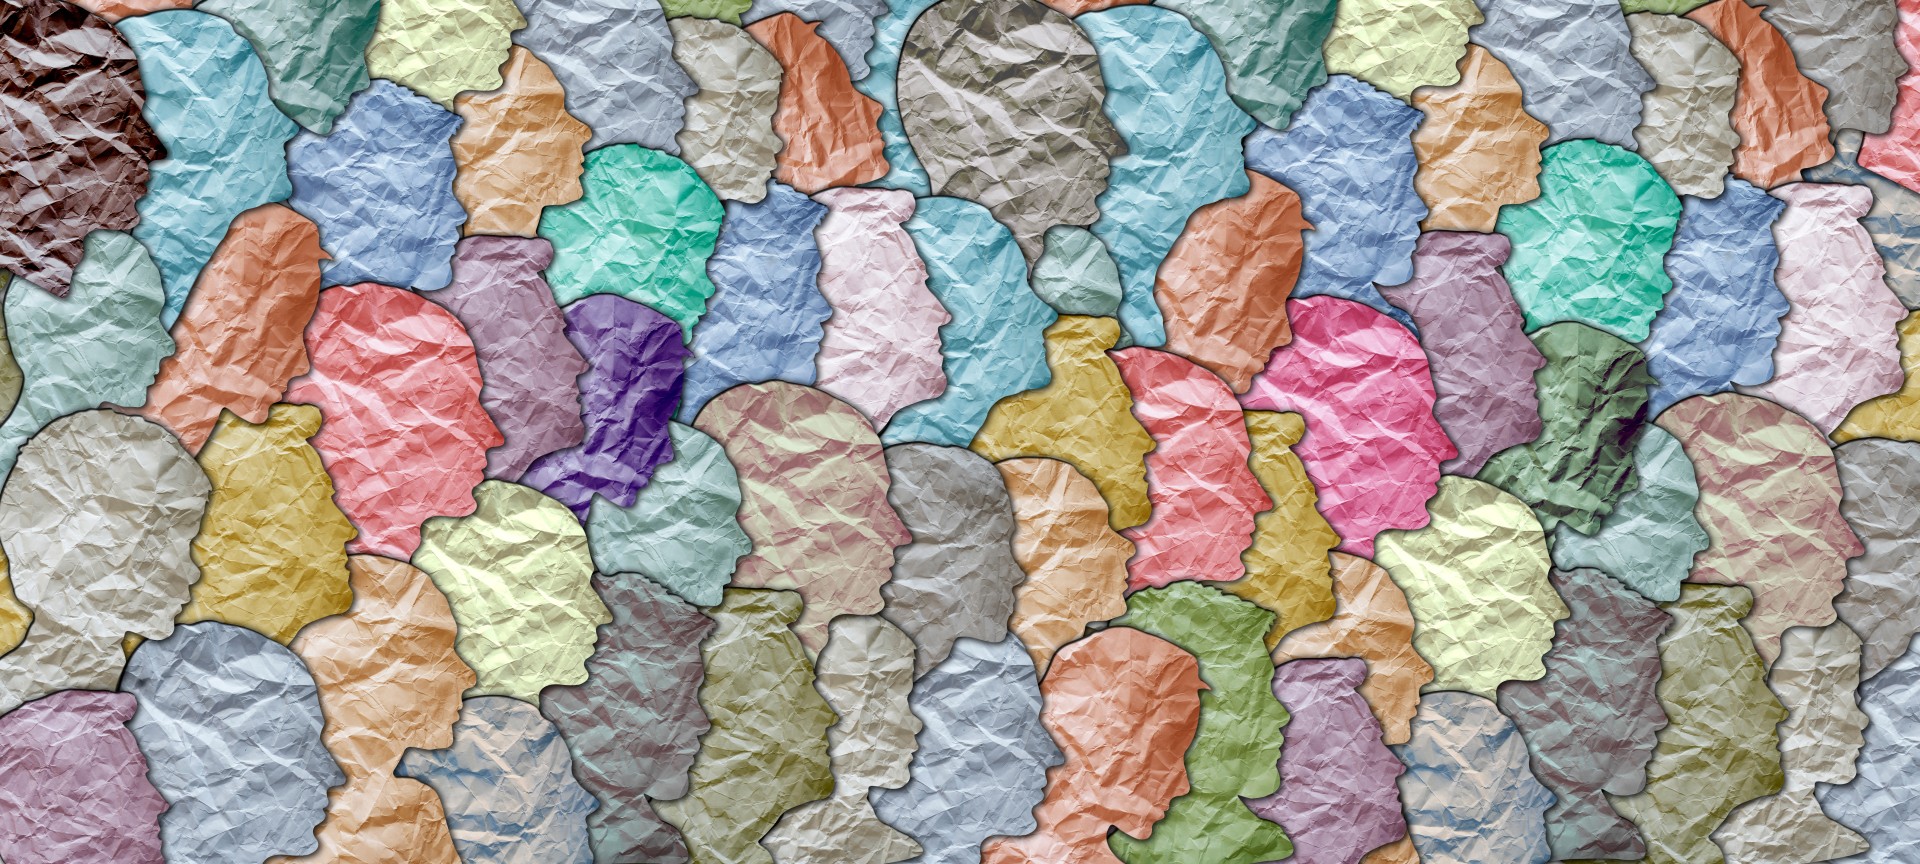 Paper cutouts of facial profiles in multiple colors arranged in a collage.